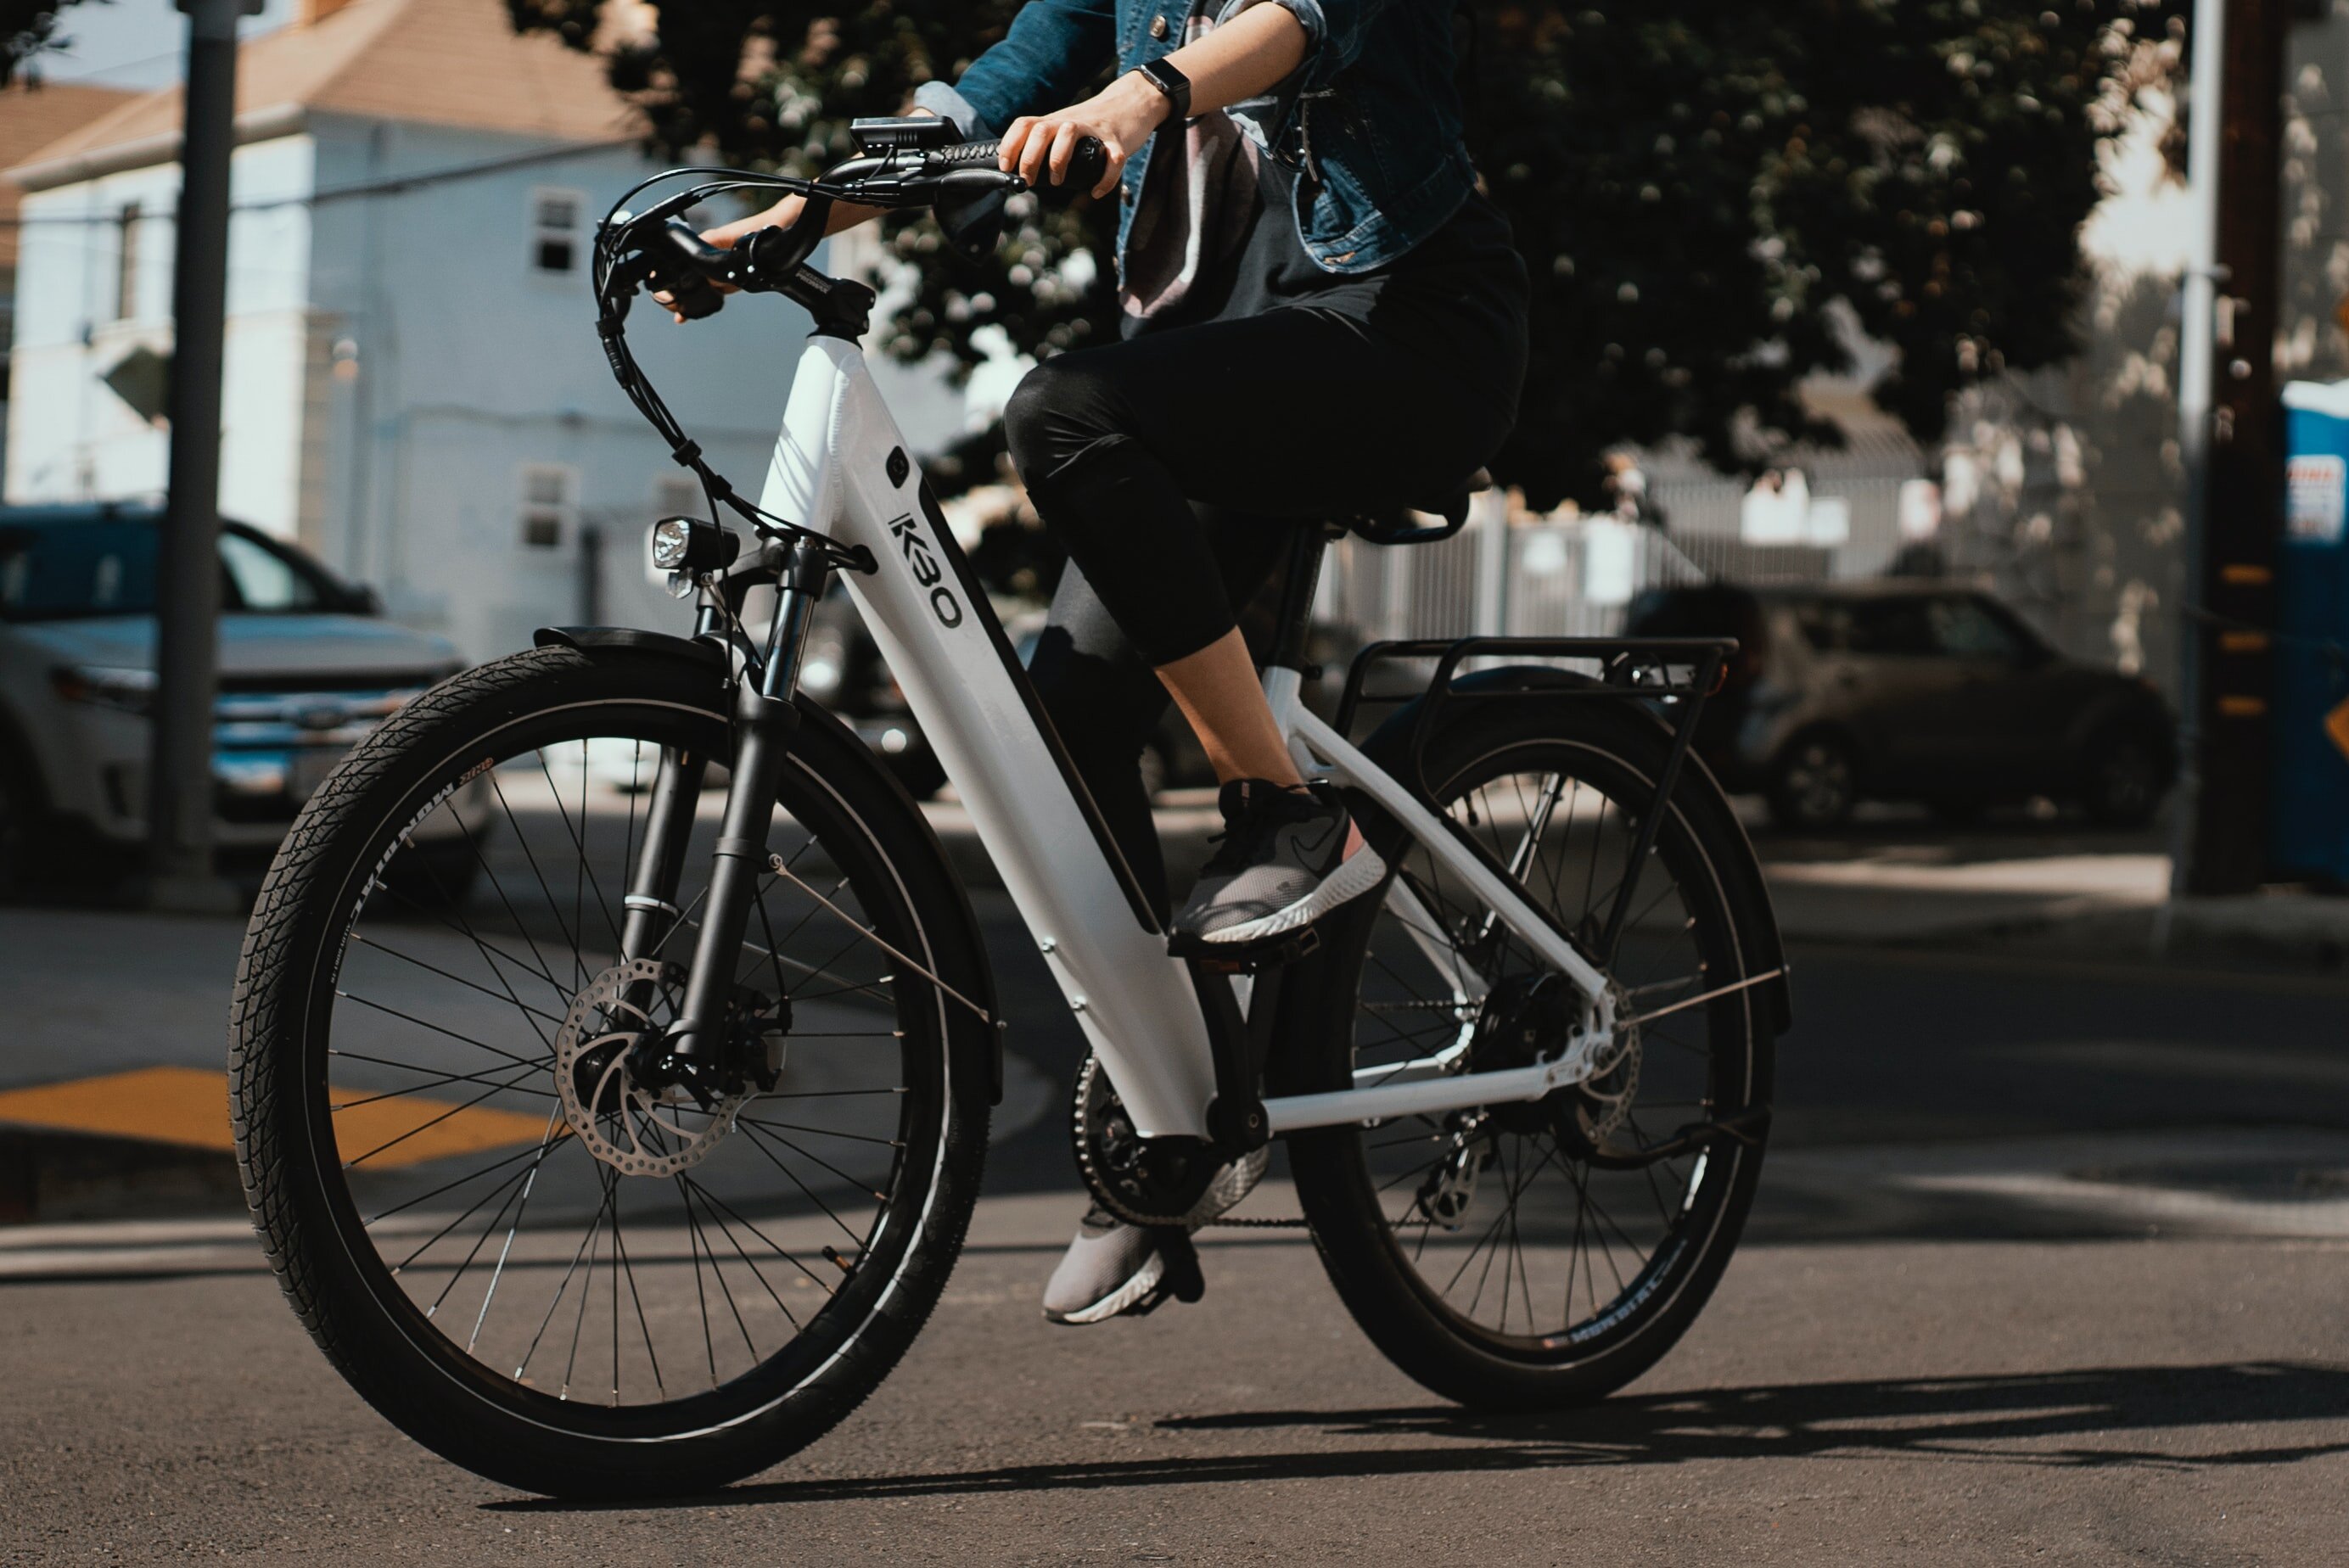 Do shared e-scooters and e-bikes reduce the emissions of urban transportation systems?